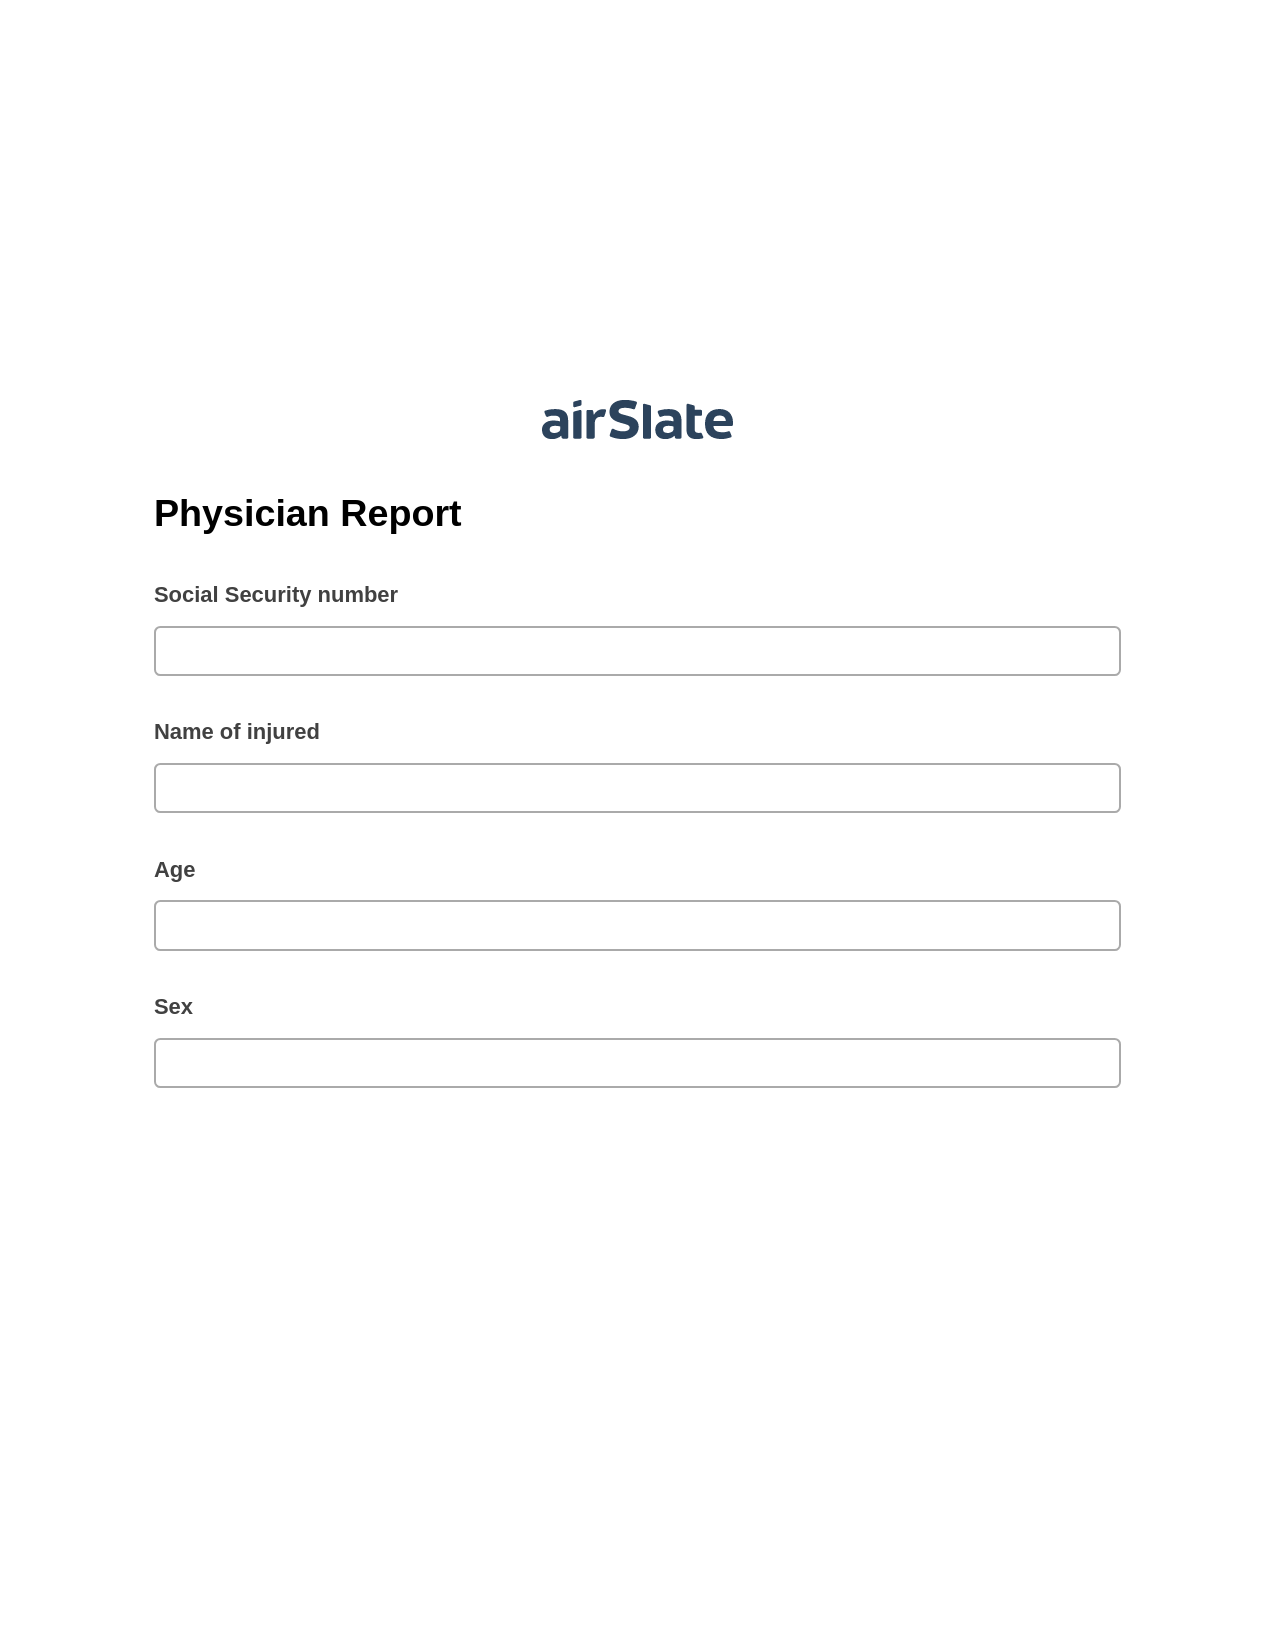 Physician Report Pre-fill Dropdowns from CSV file Bot, Update MS Dynamics 365 Record Bot, Export to WebMerge Bot